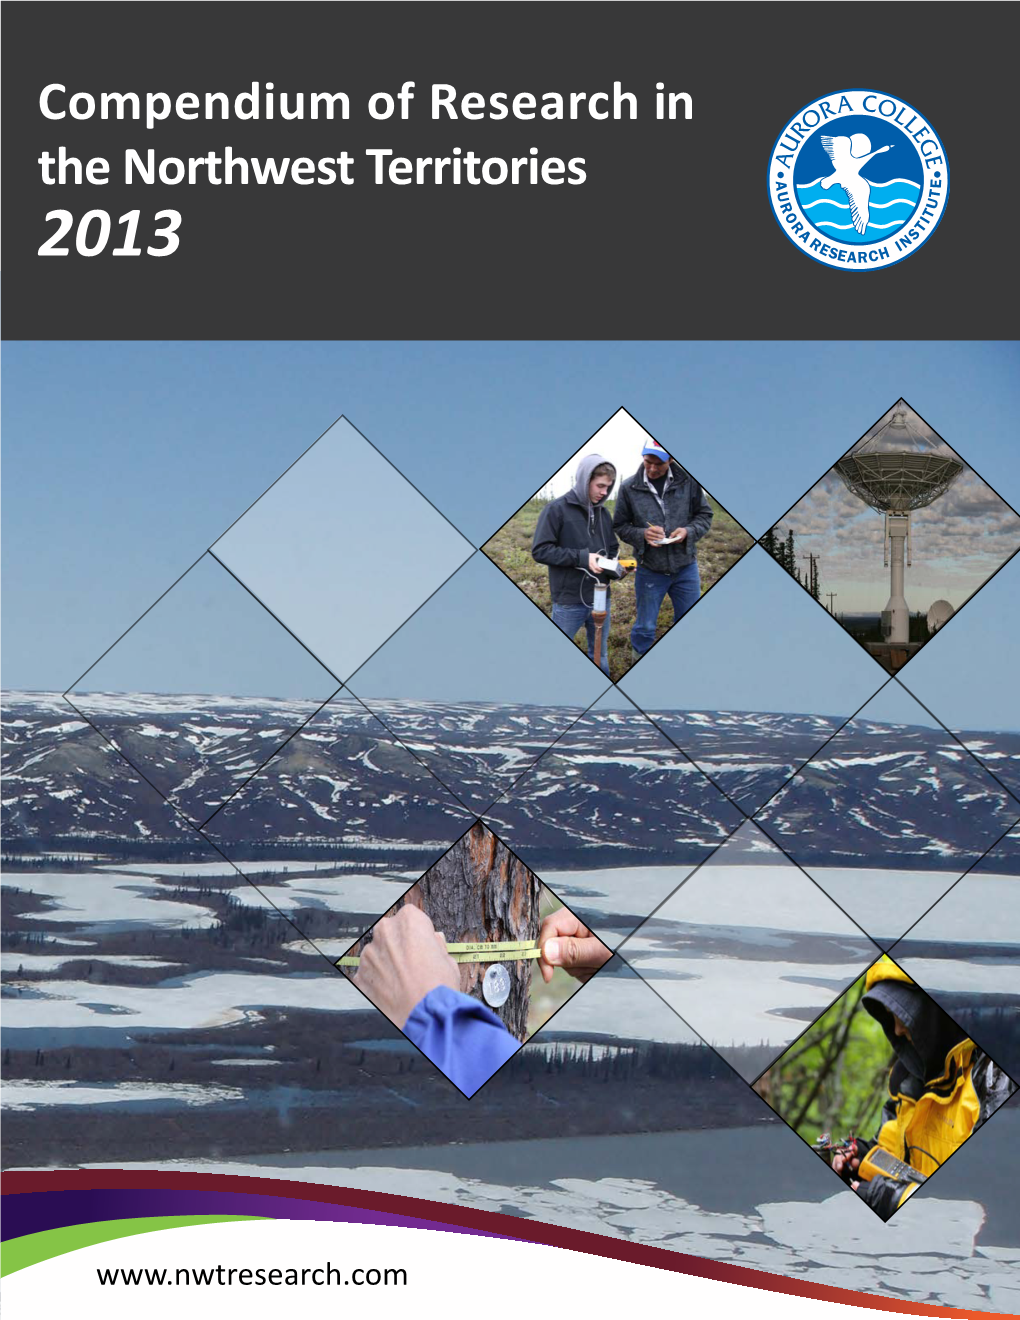 Compendium of Research in the NWT 2013